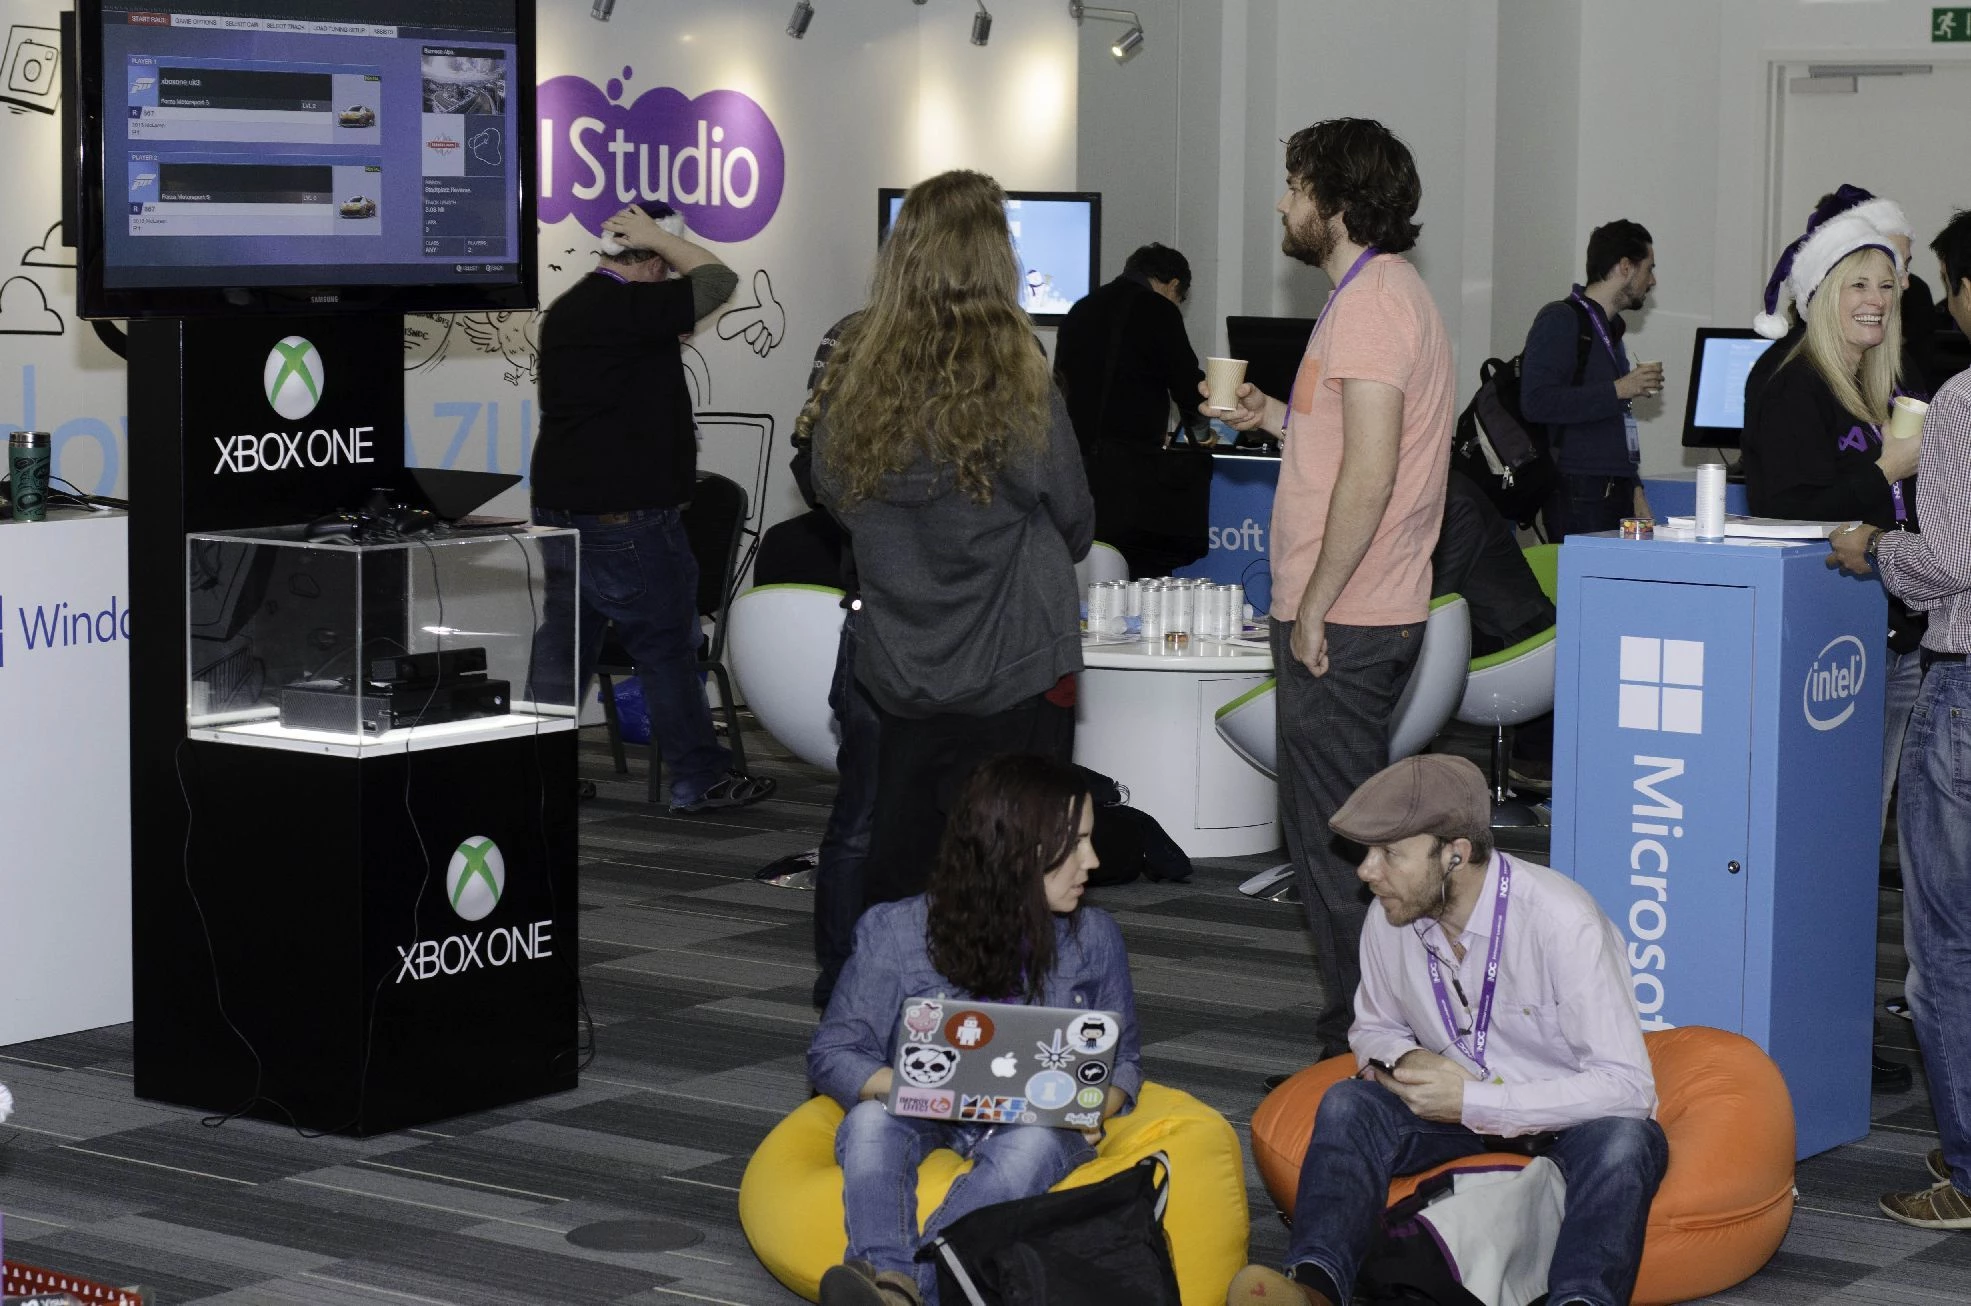 Networking in the Microsoft Visual Studio area, NDC London - Kristoffer Sunset Photography